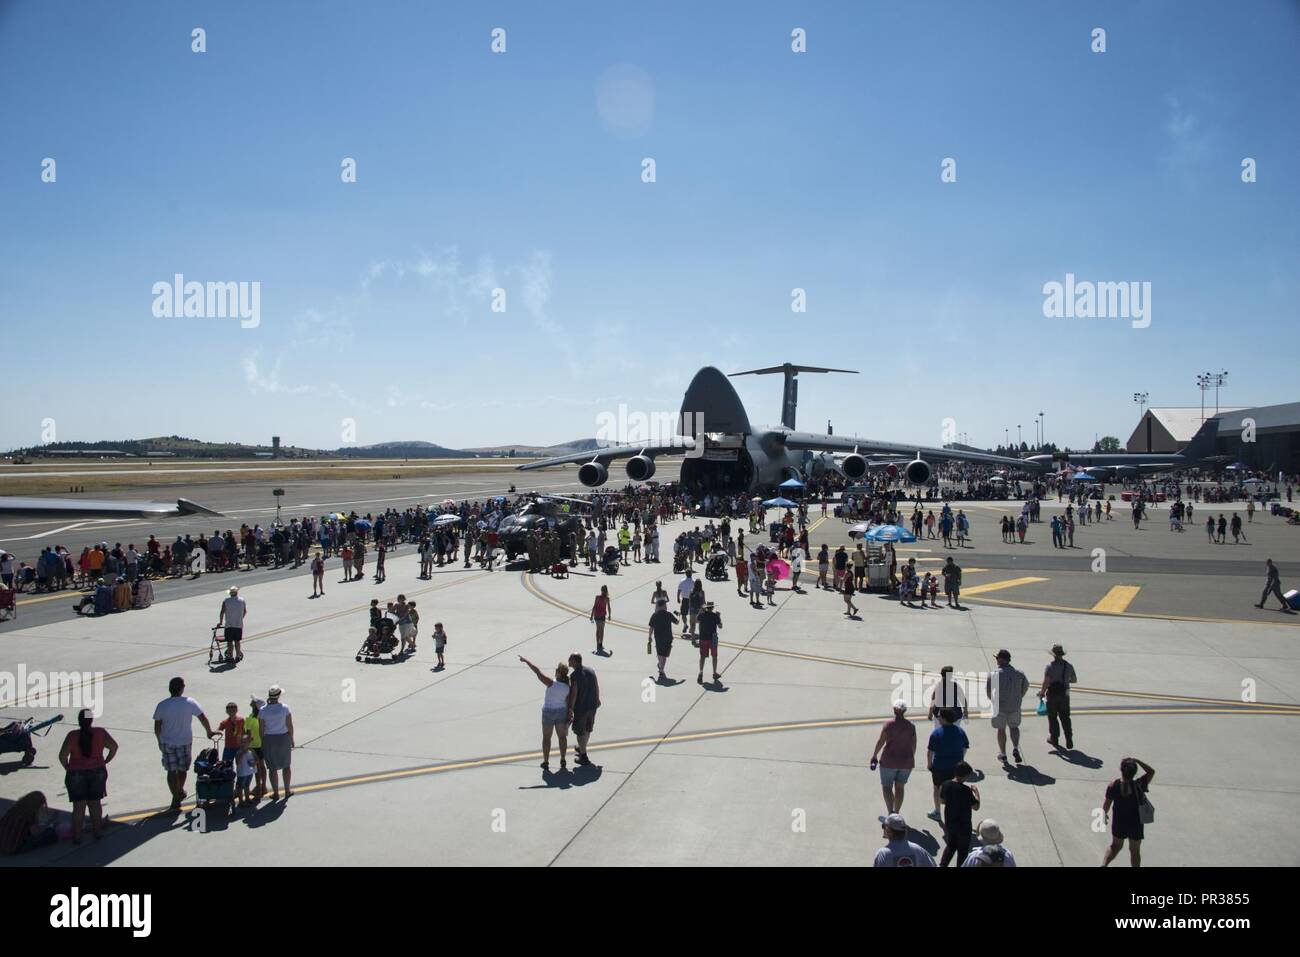 Service members and members from the local community gathered at Fairchild Air Force Base, Washington, during the SkyFest 2017 Air Show and Open House at Fairchild Air Force Base, Washington, July 29, 2017. SkyFest is Fairchild’s air show and open house to give the local and regional community the opportunity to view Airmen and our resources. Stock Photo